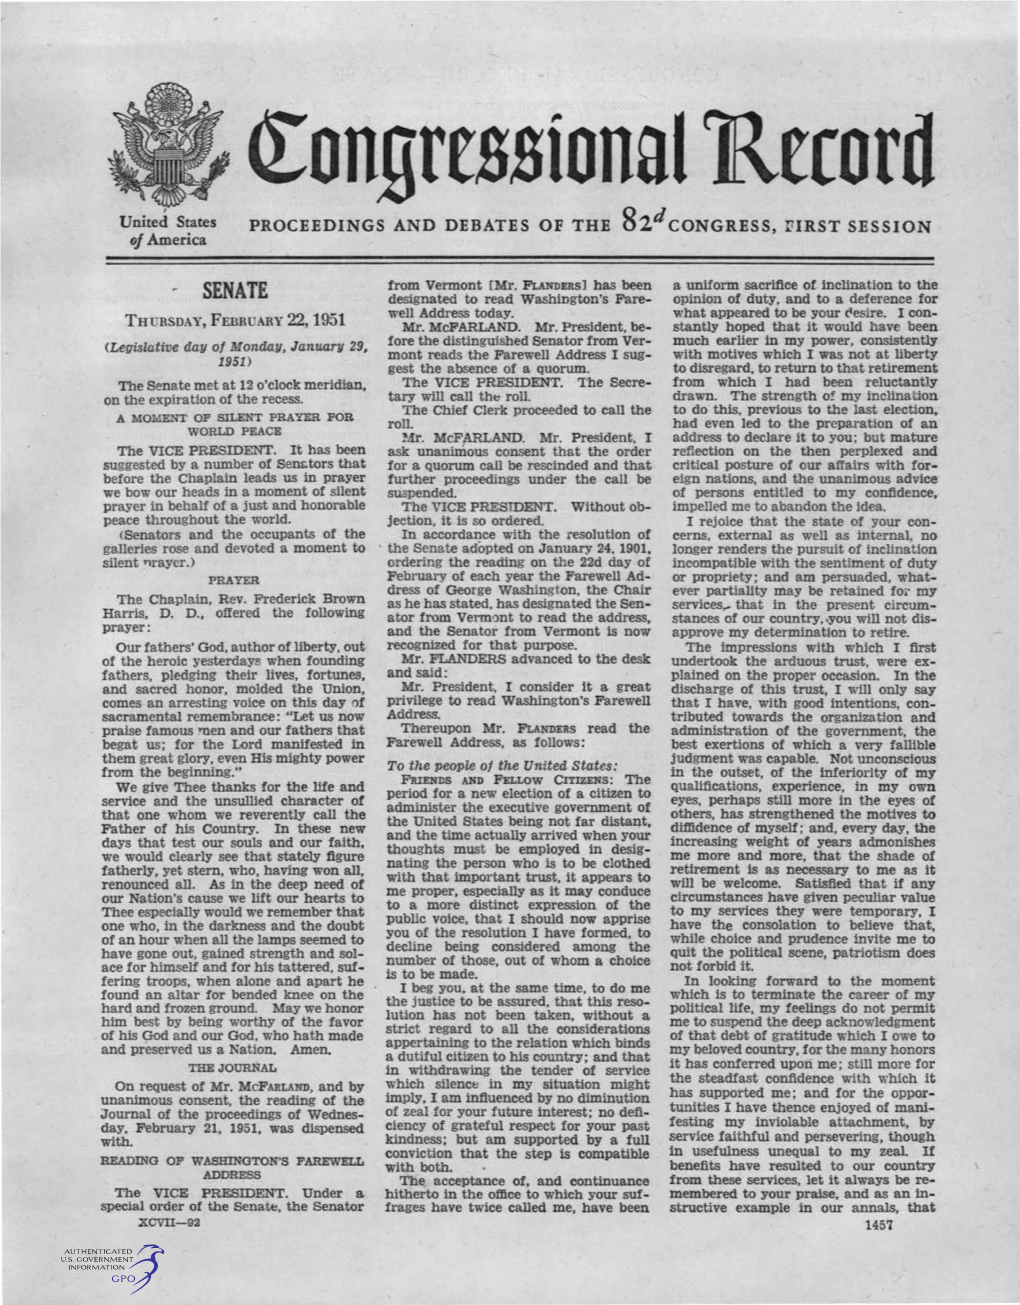 SENATE Designated to Read, Washington's Fare­ Opinion of Duty, and to a Deference for Well Address Today